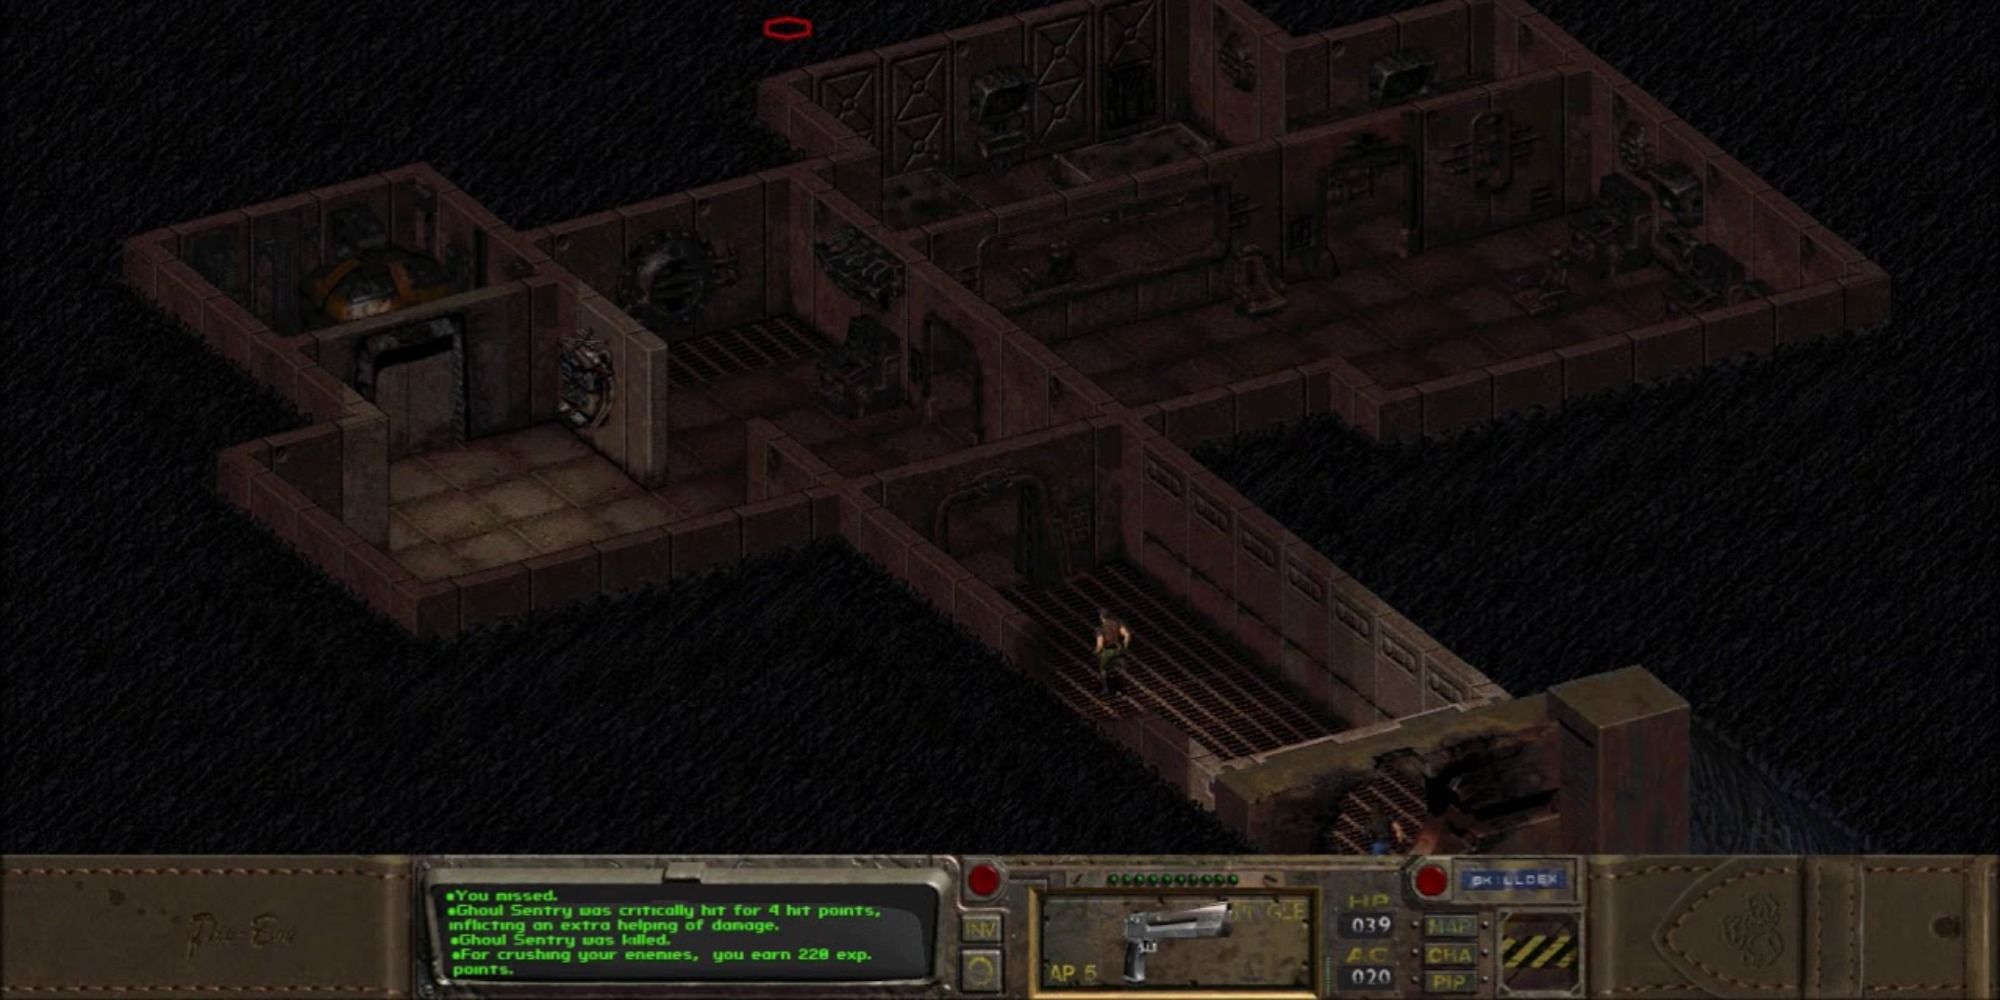 Vault 12's layout top down view via Fallout 1 and pipboy persepctive